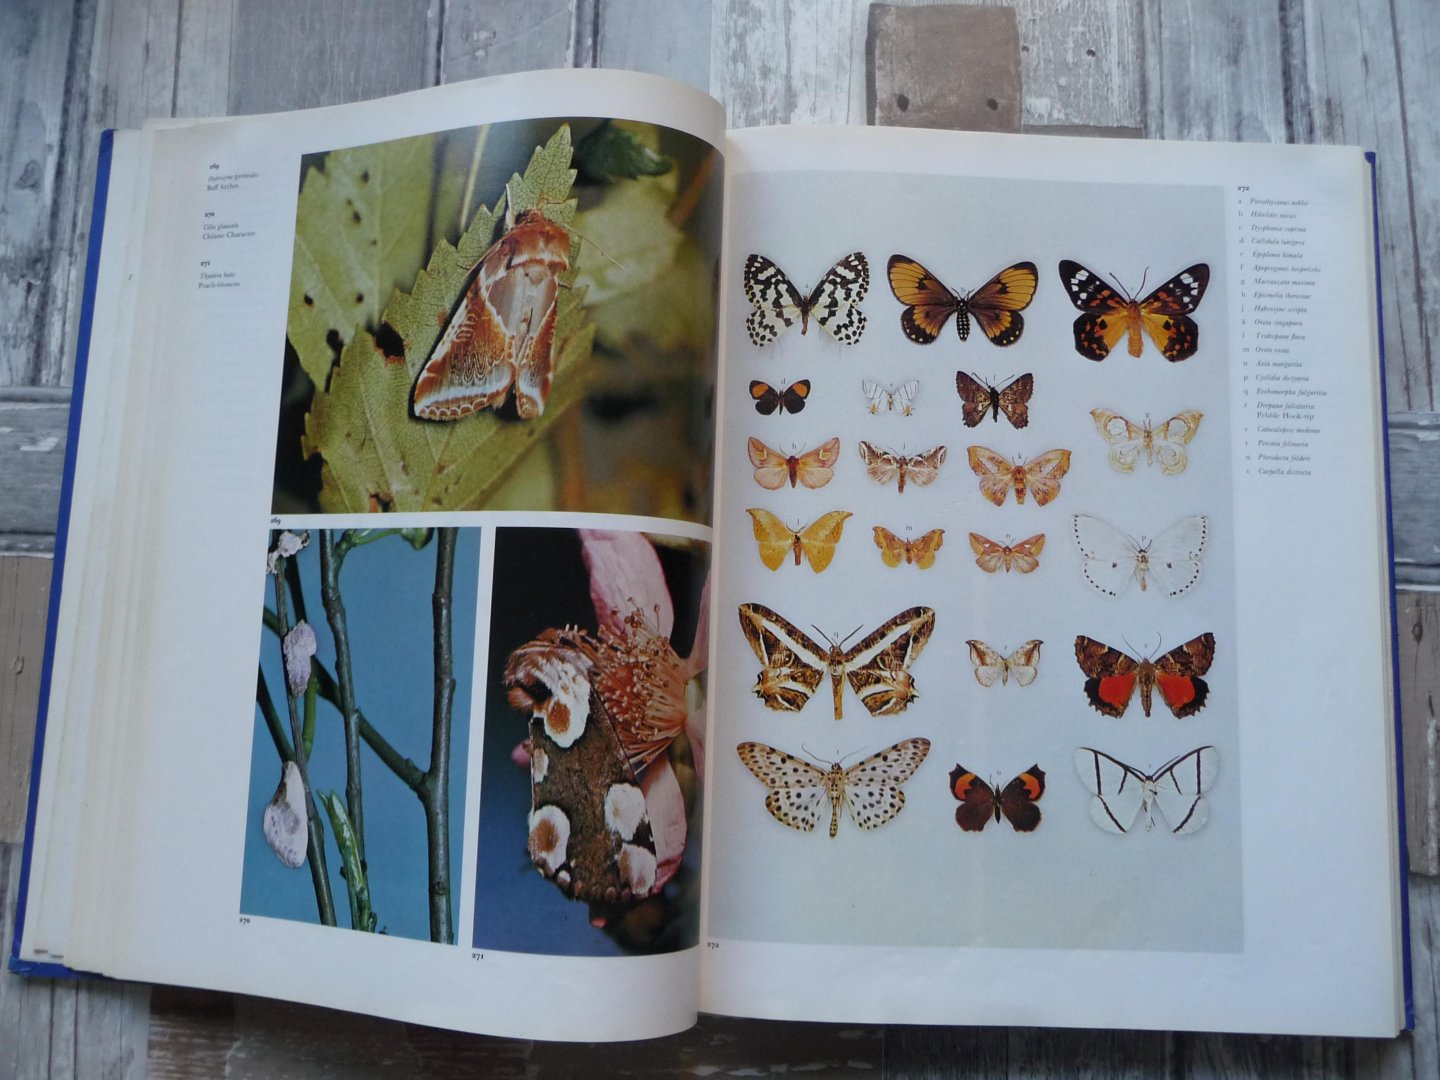 WATSON, ALLAN, WHALLEY, PAUL E.S. - The dictionary of Butterflies and Moths in colour